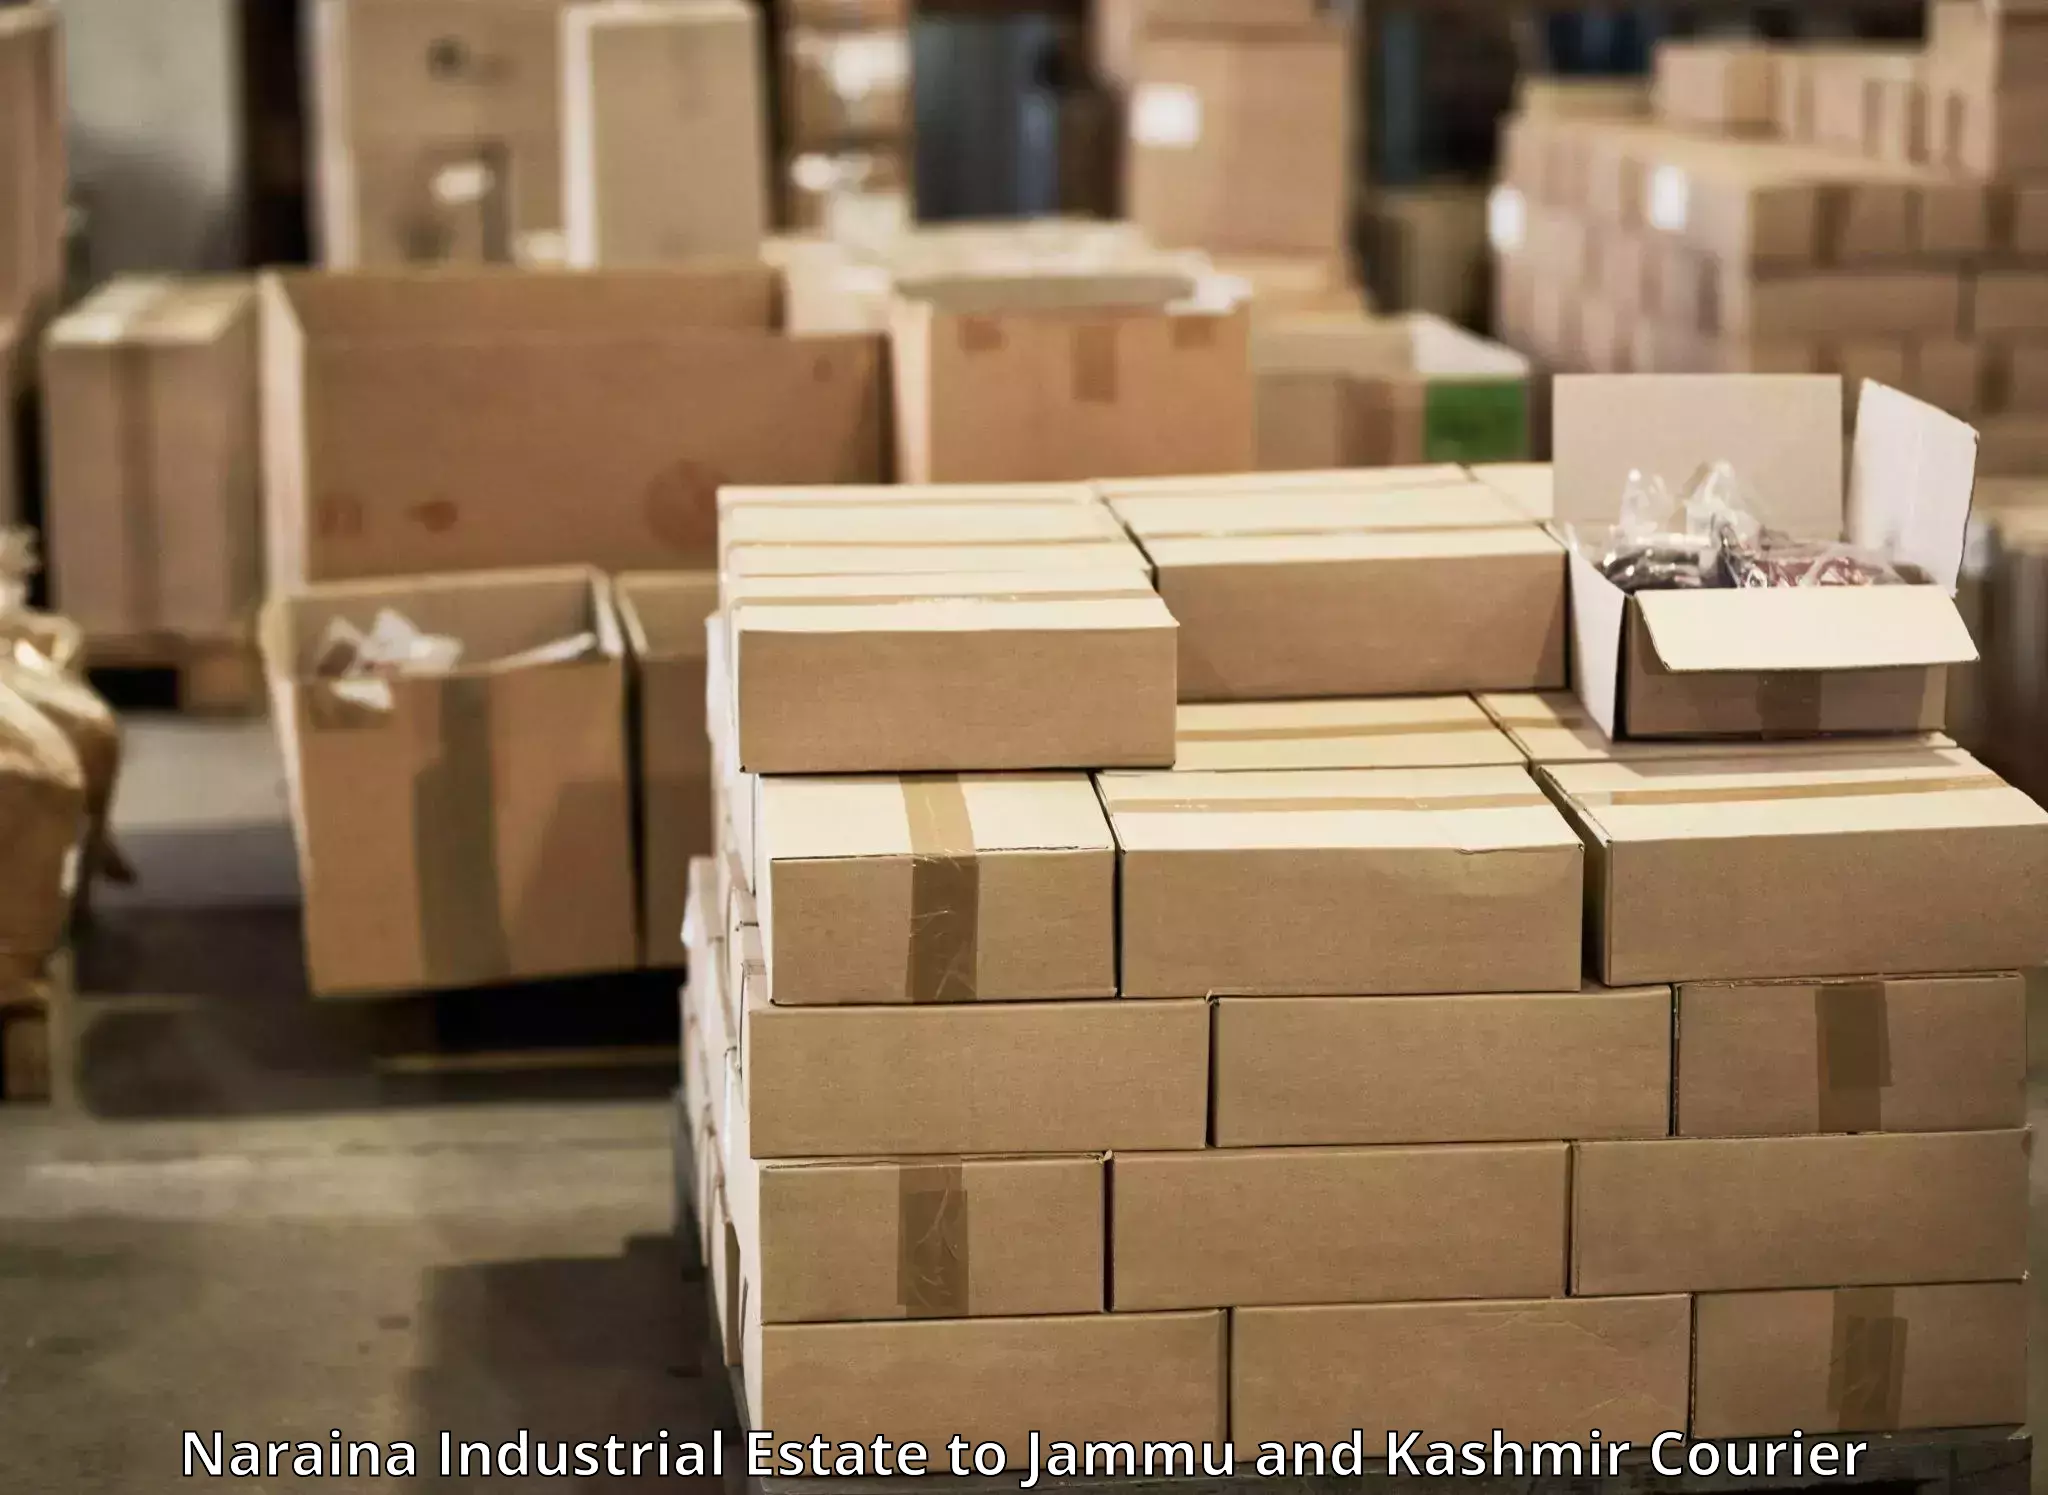 End-to-end delivery in Naraina Industrial Estate to Budgam